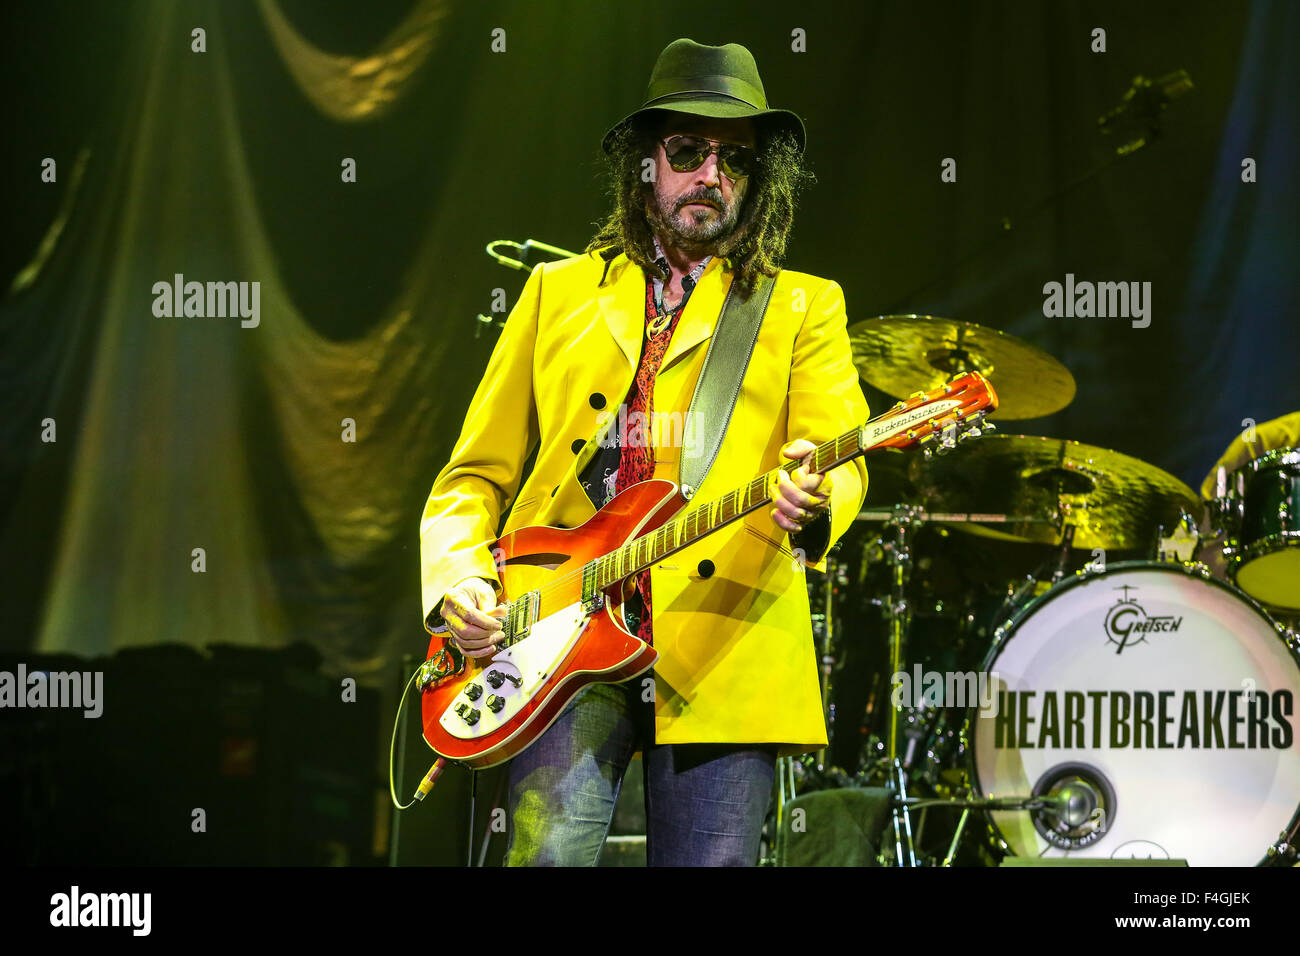 Music artist TOM PETTY & THE HEARTBREAKERS bring their 2014 Summer Tour to Raleigh, NC.  Tom Petty and the Heartbreakers is an American rock band from Gainesville, Florida. Stock Photo